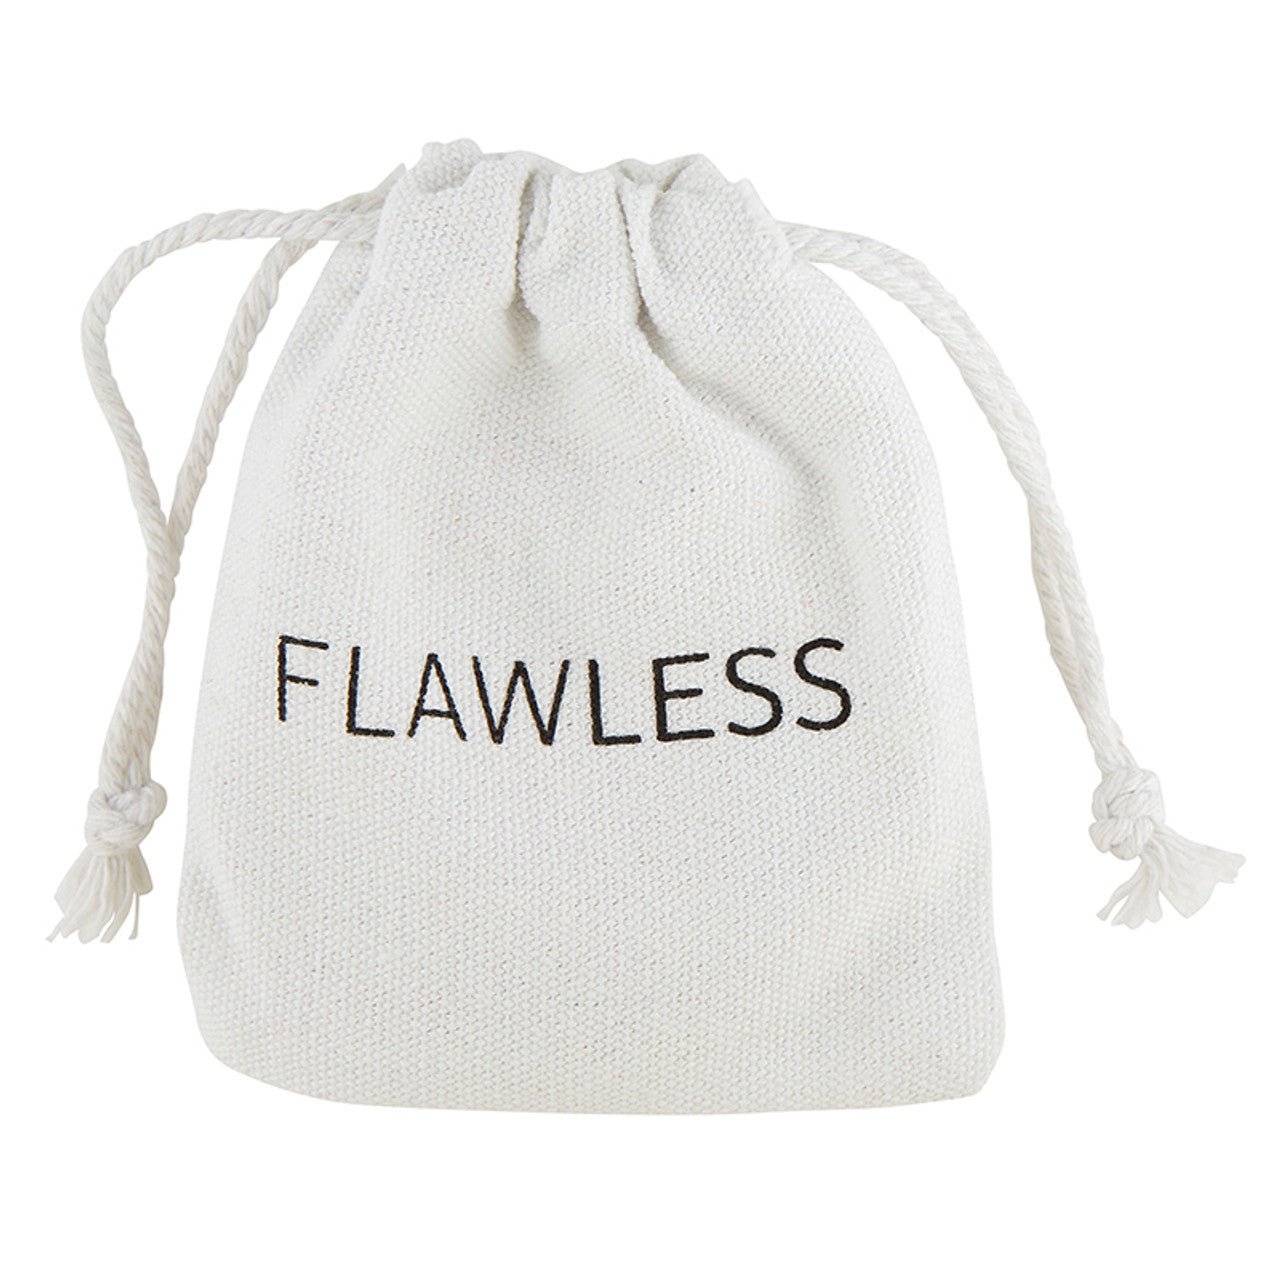 Flawless Compact Mirror | Comes in Drawstring Muslin Bag